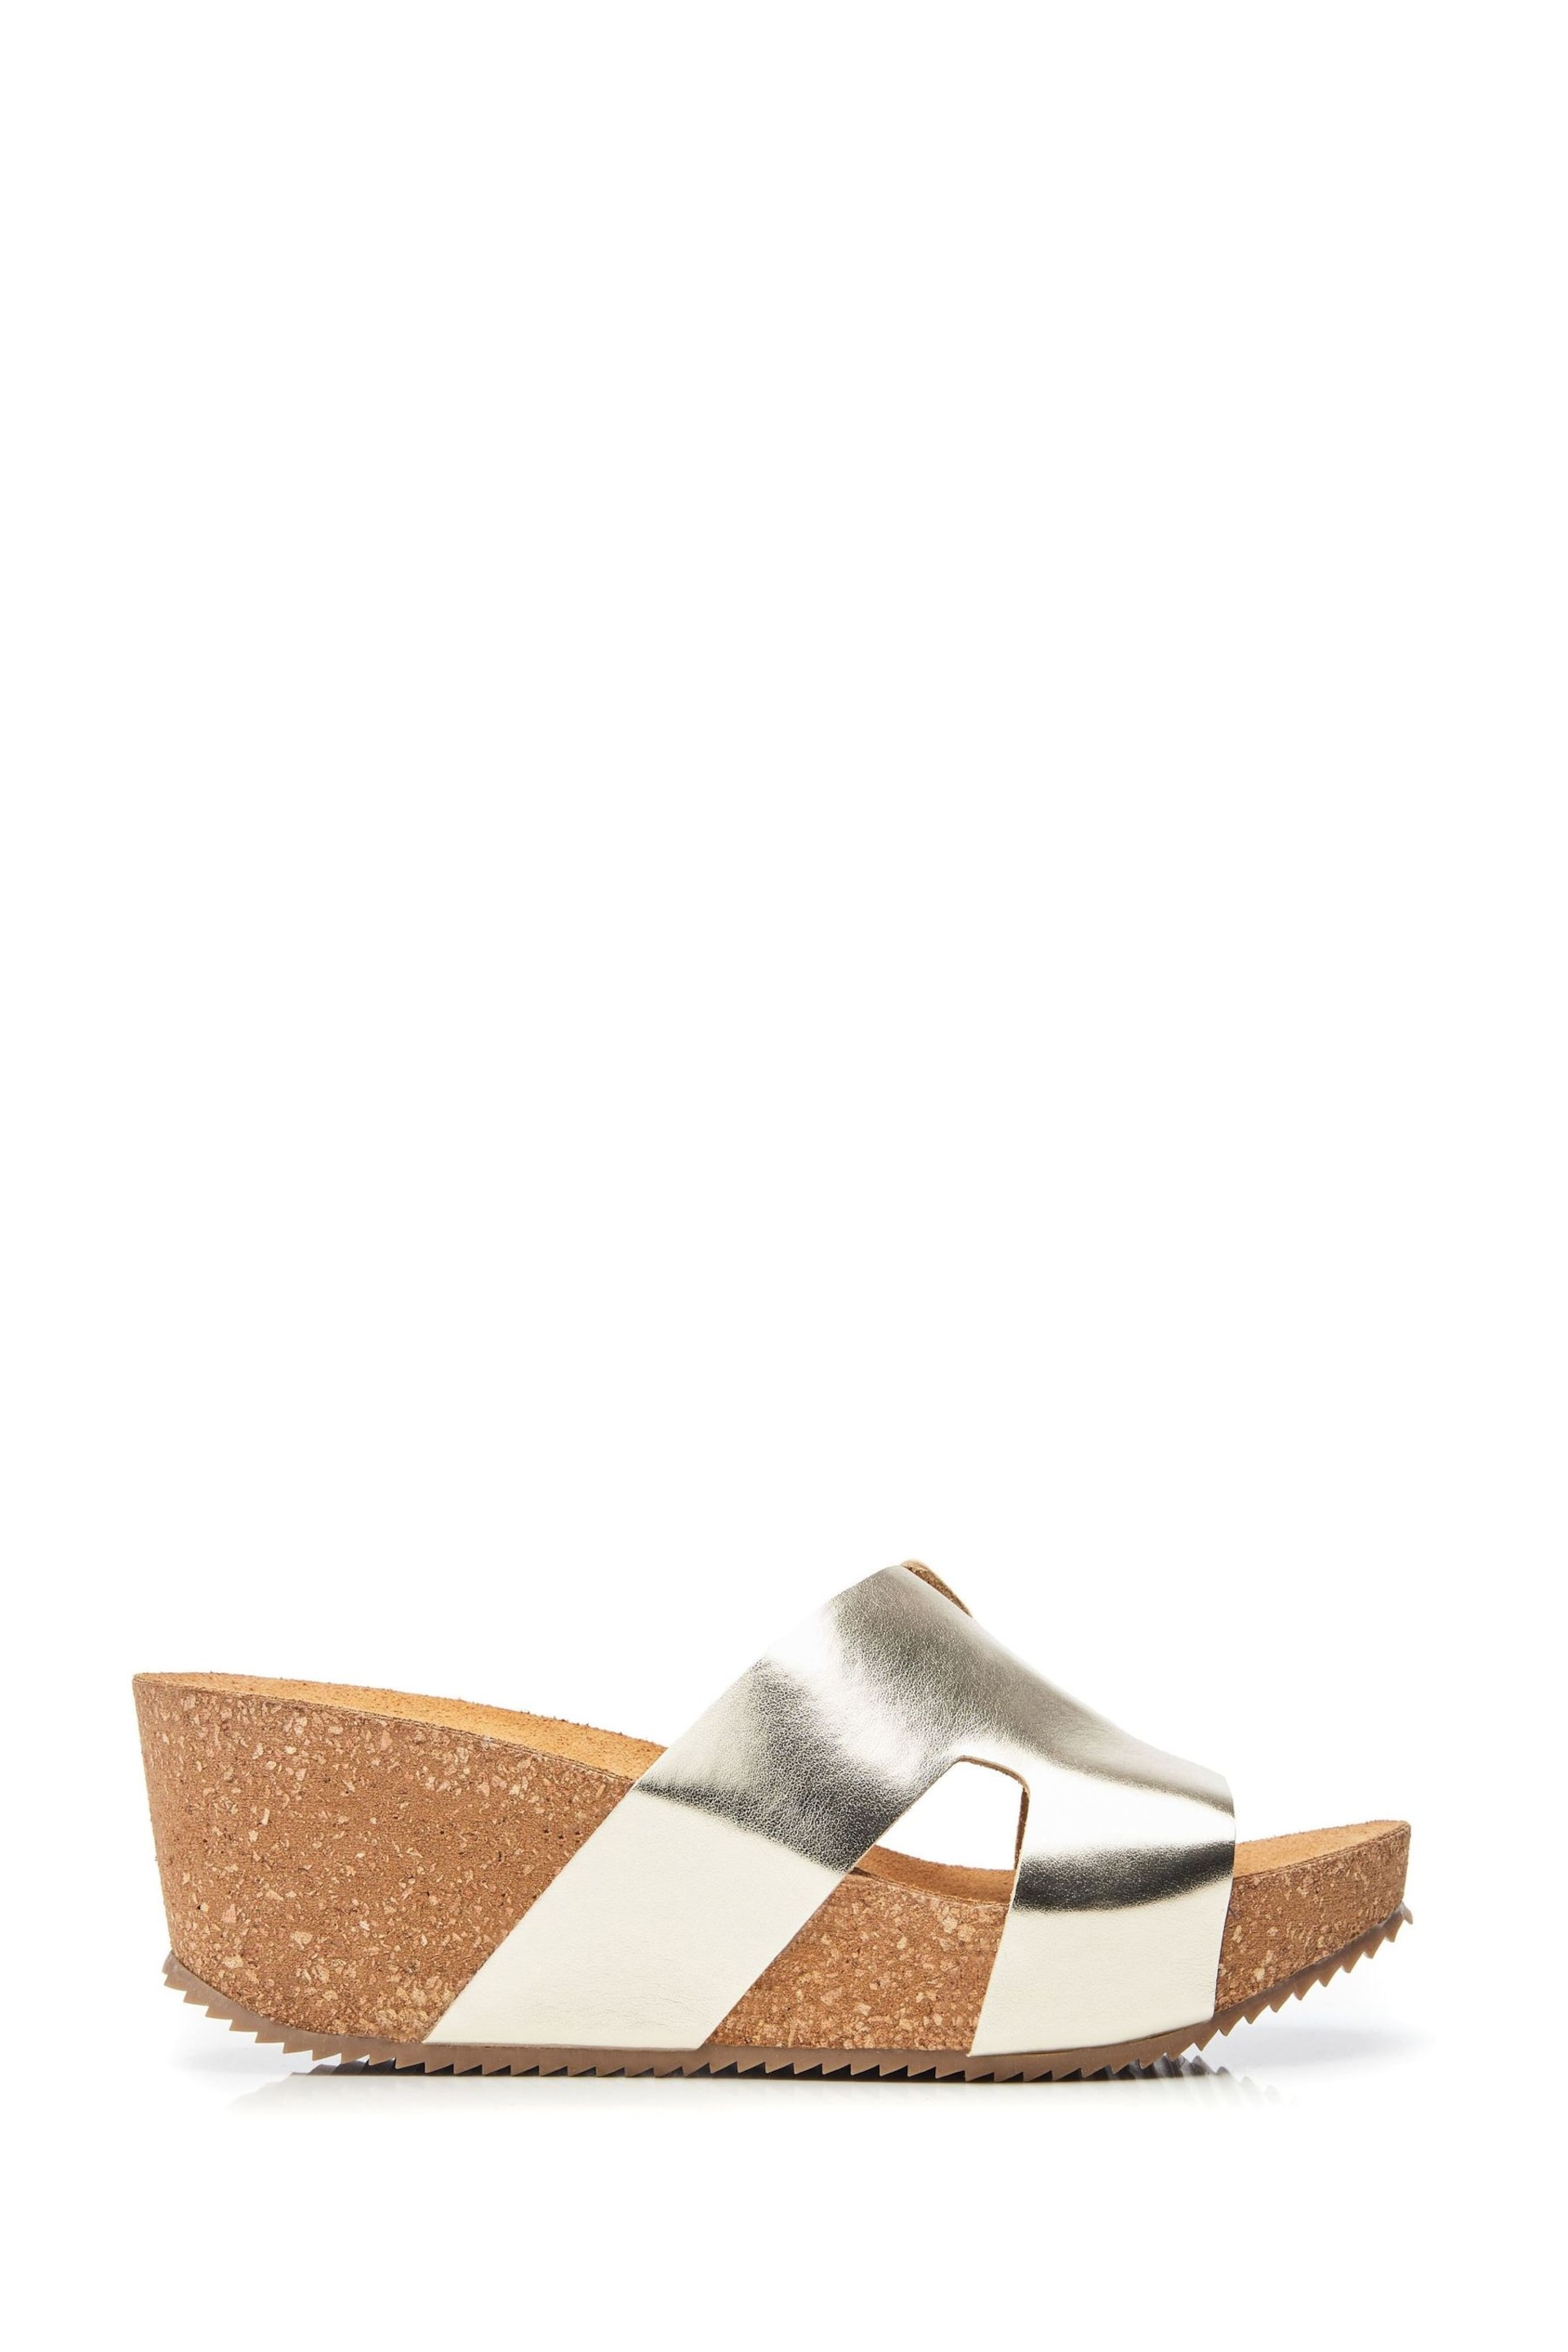 Moda in Pelle Hollie H Band Mules Cork Wedges - Image 1 of 4